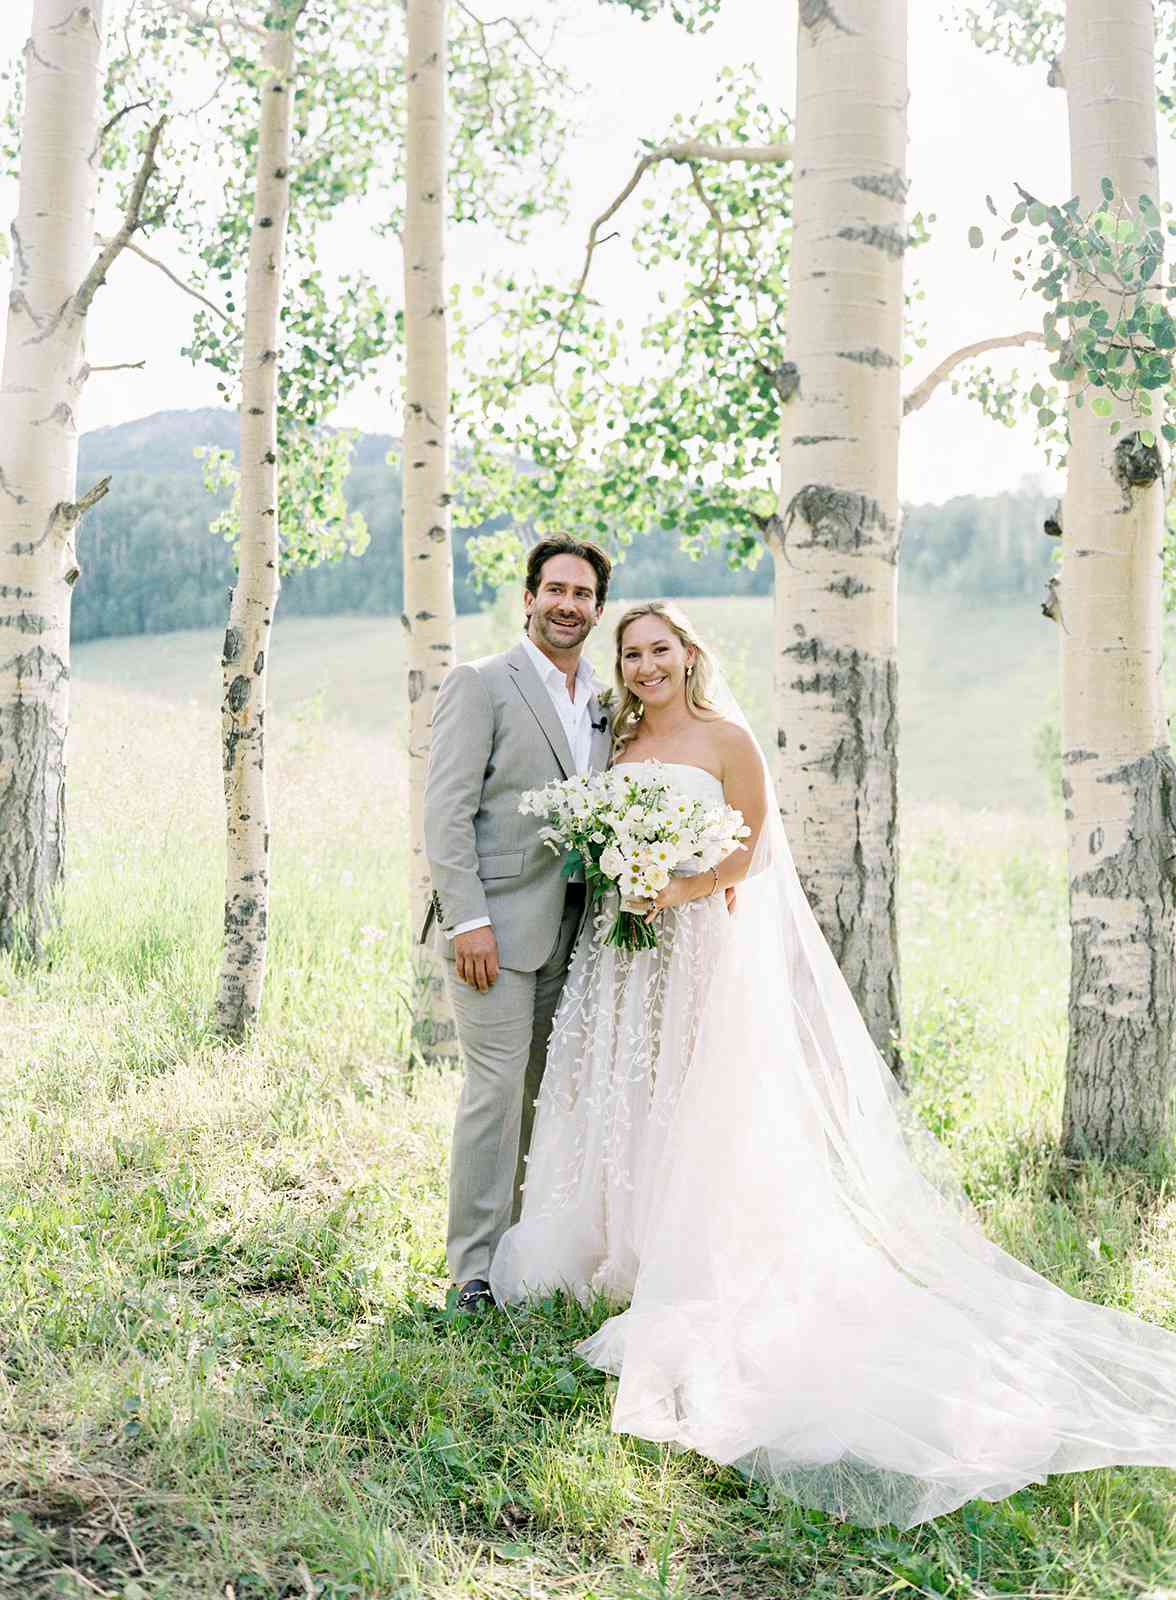 bride and groom smiling outside in wooded area